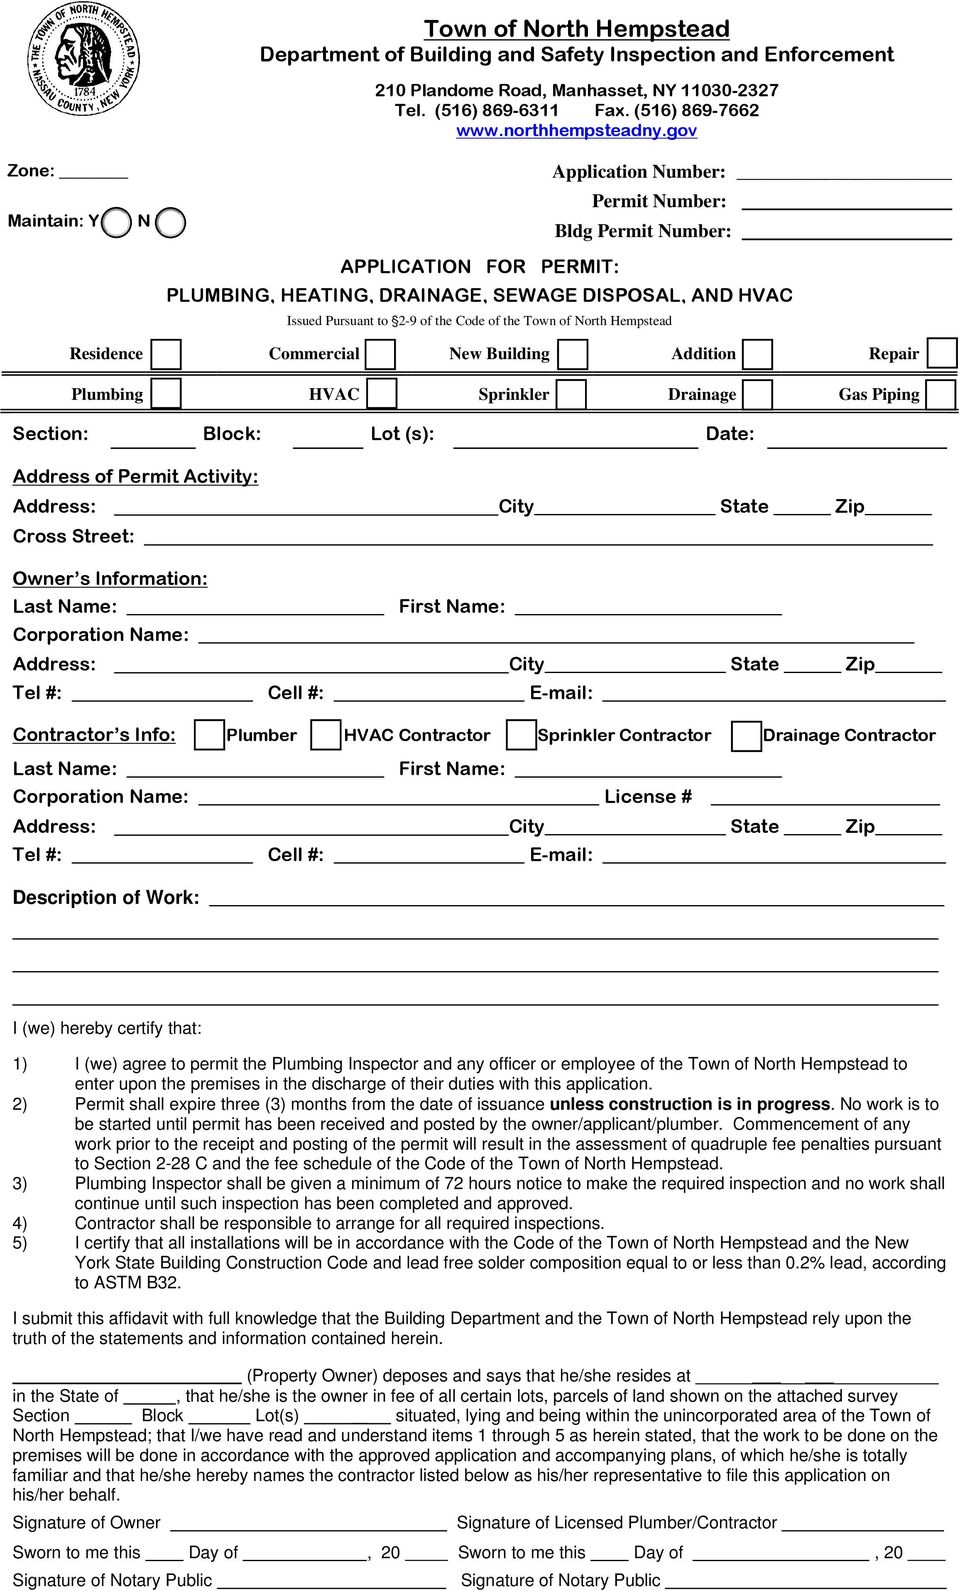 gov Application Number: _ Permit Number: Bldg Permit Number: APPLICATION FOR PERMIT: PLUMBING, HEATING, DRAINAGE, SEWAGE DISPOSAL, AND HVAC Issued Pursuant to '2-9 of the Code of the Town of North